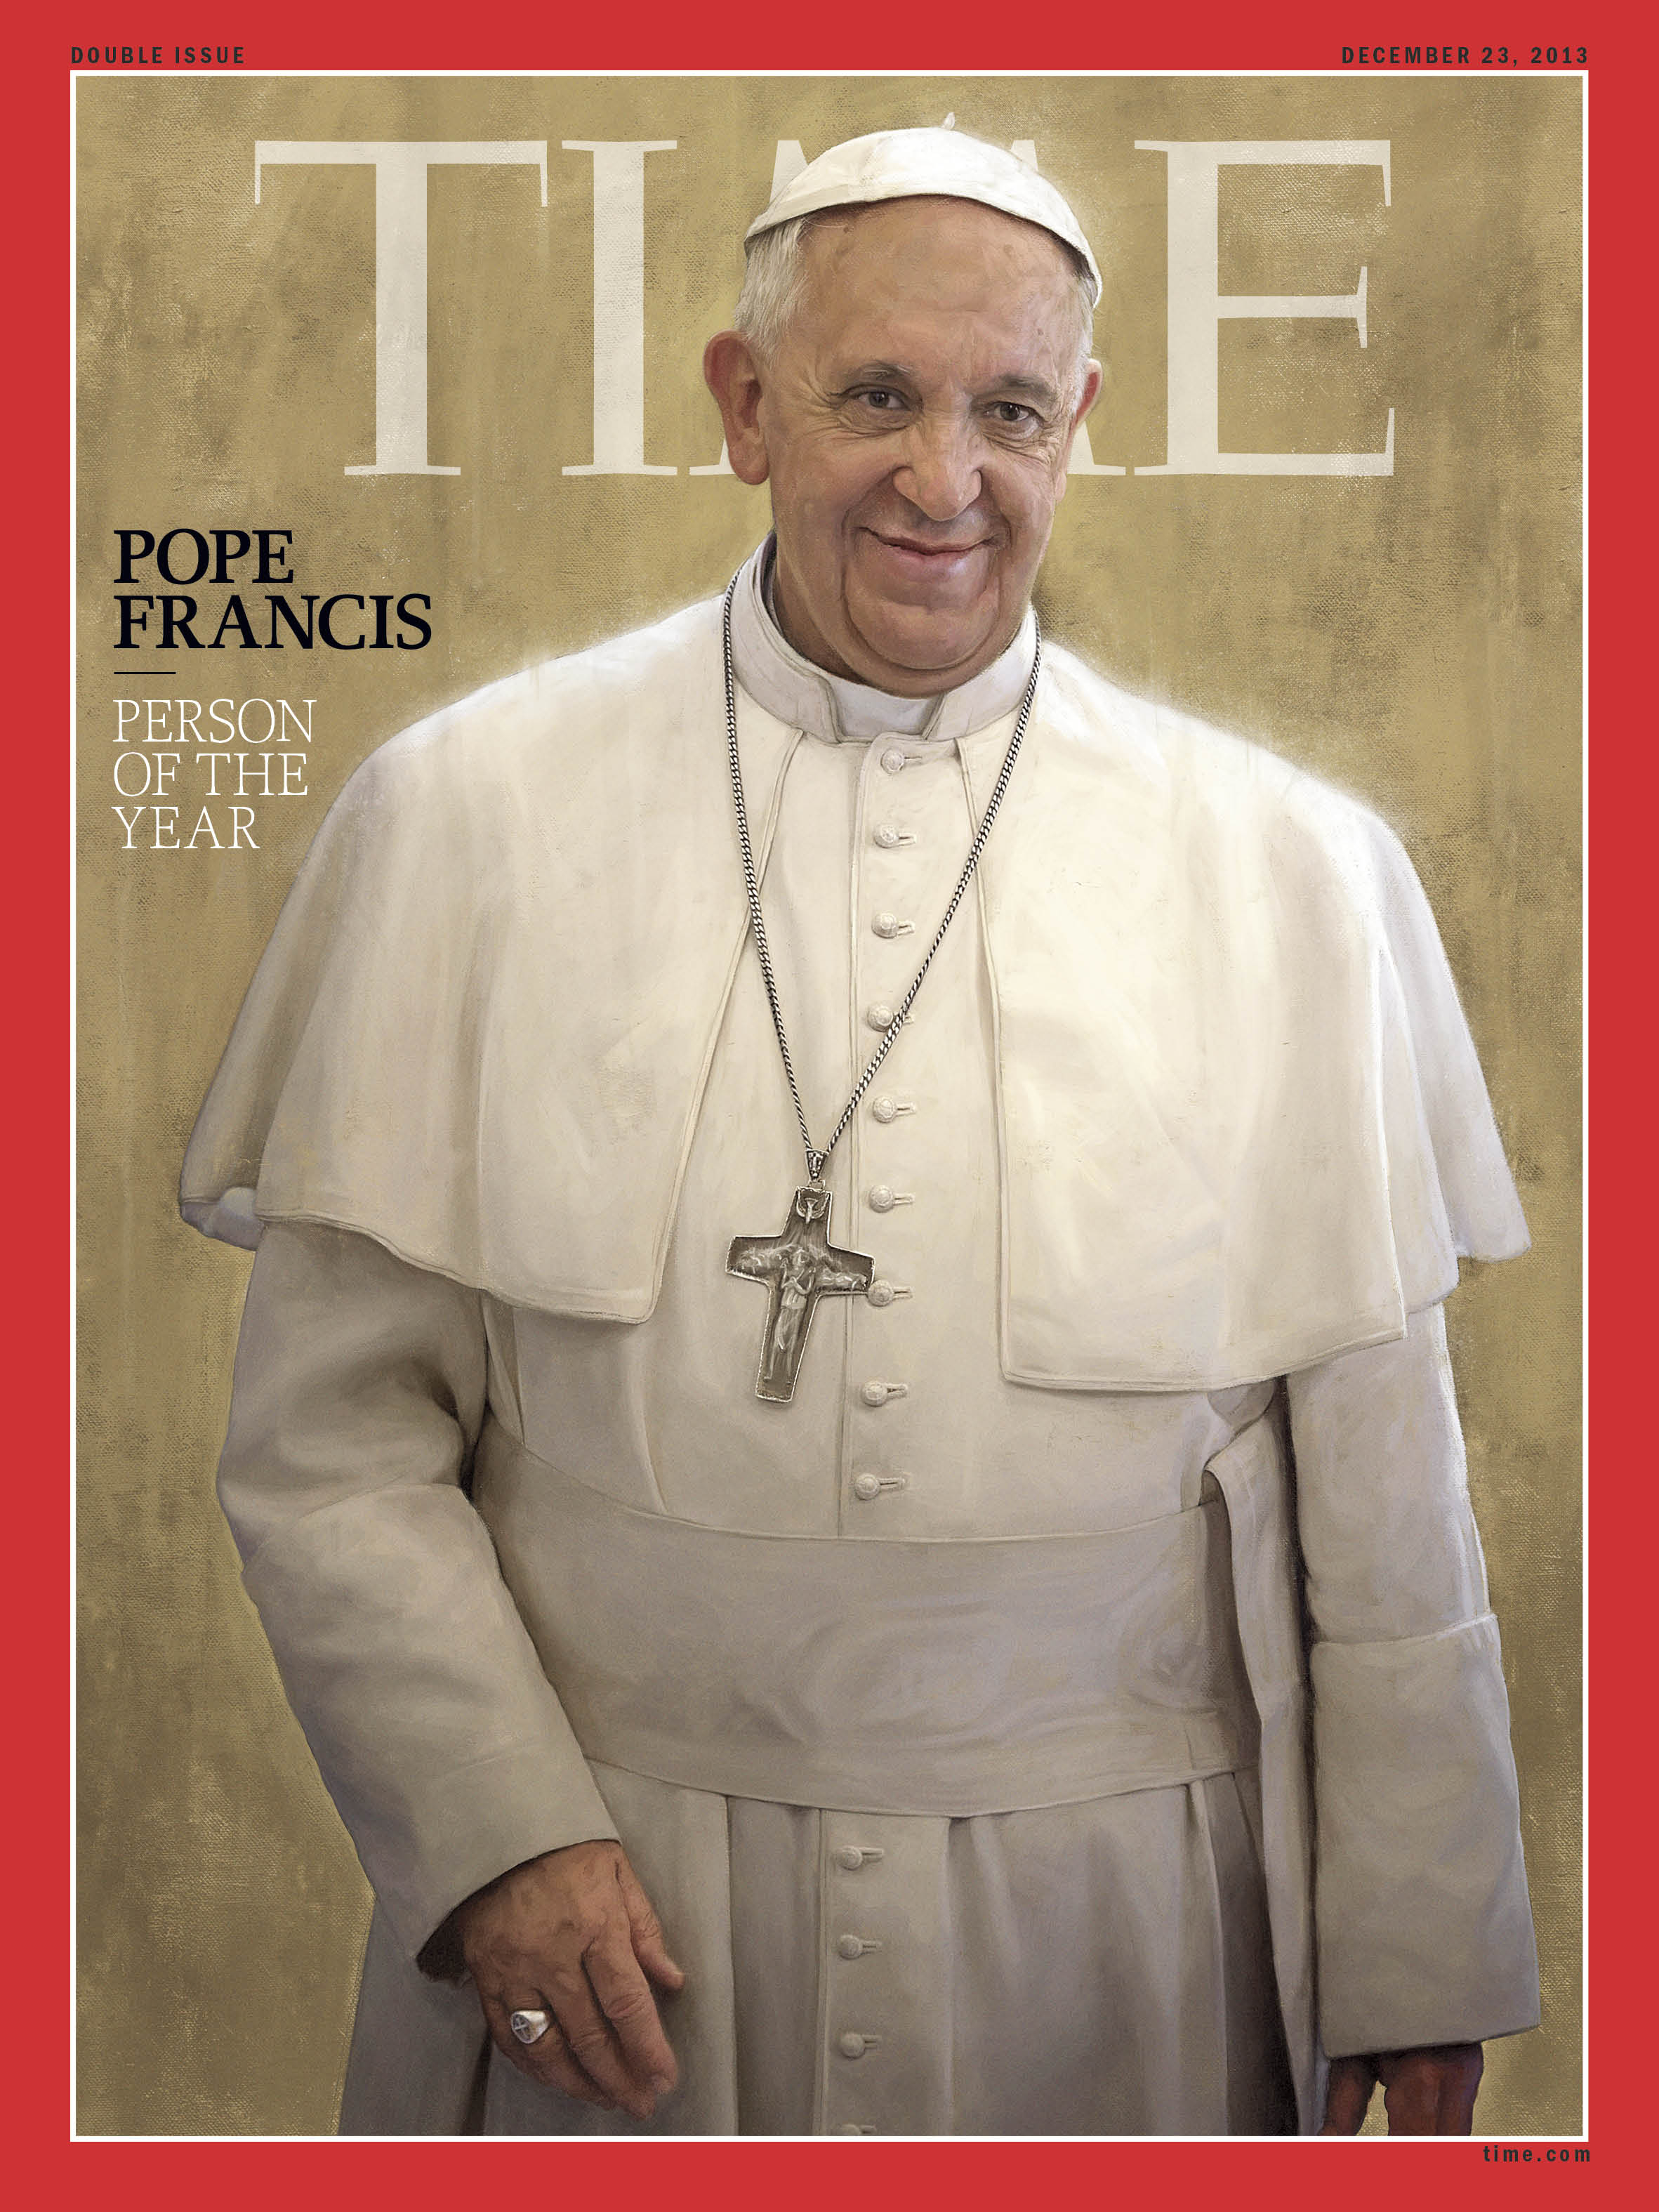 Time's cover on Pope Francis